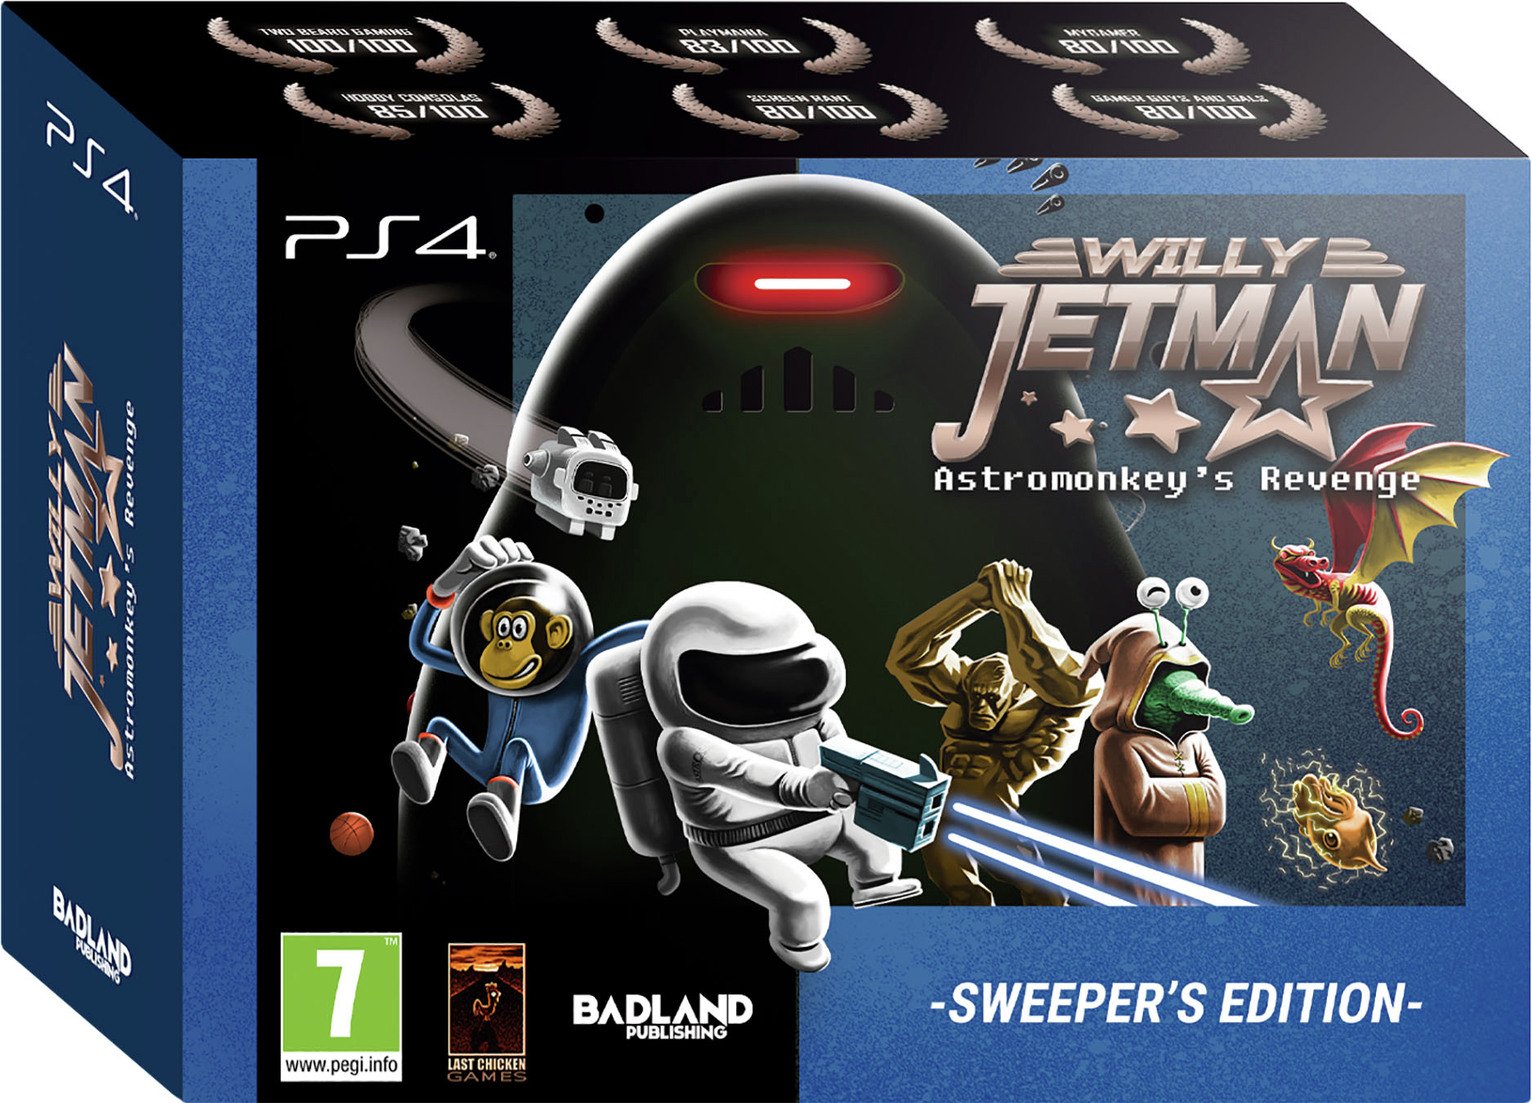 Willy Jetman: Astromonkey's Revenge PS4 Game Pre-Order Review